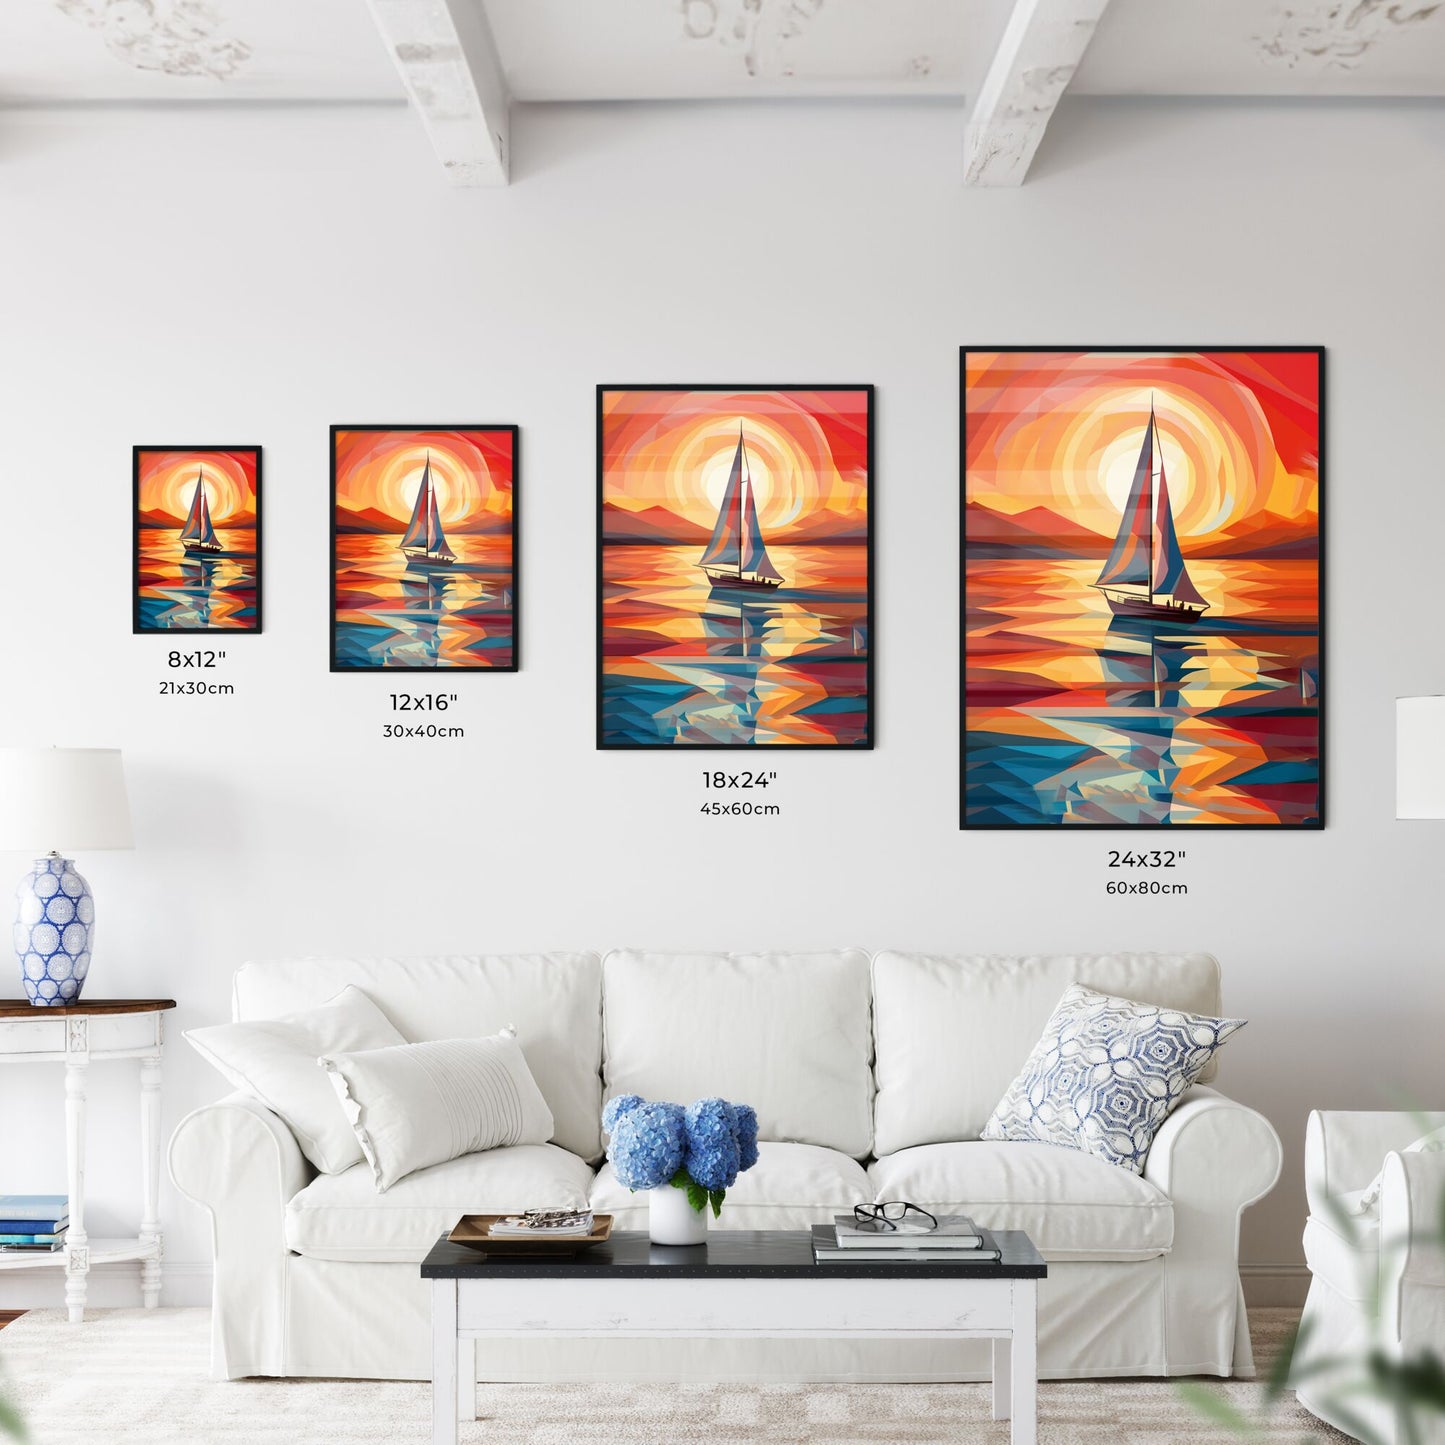 Painting Of A Sailboat In The Water Art Print Default Title